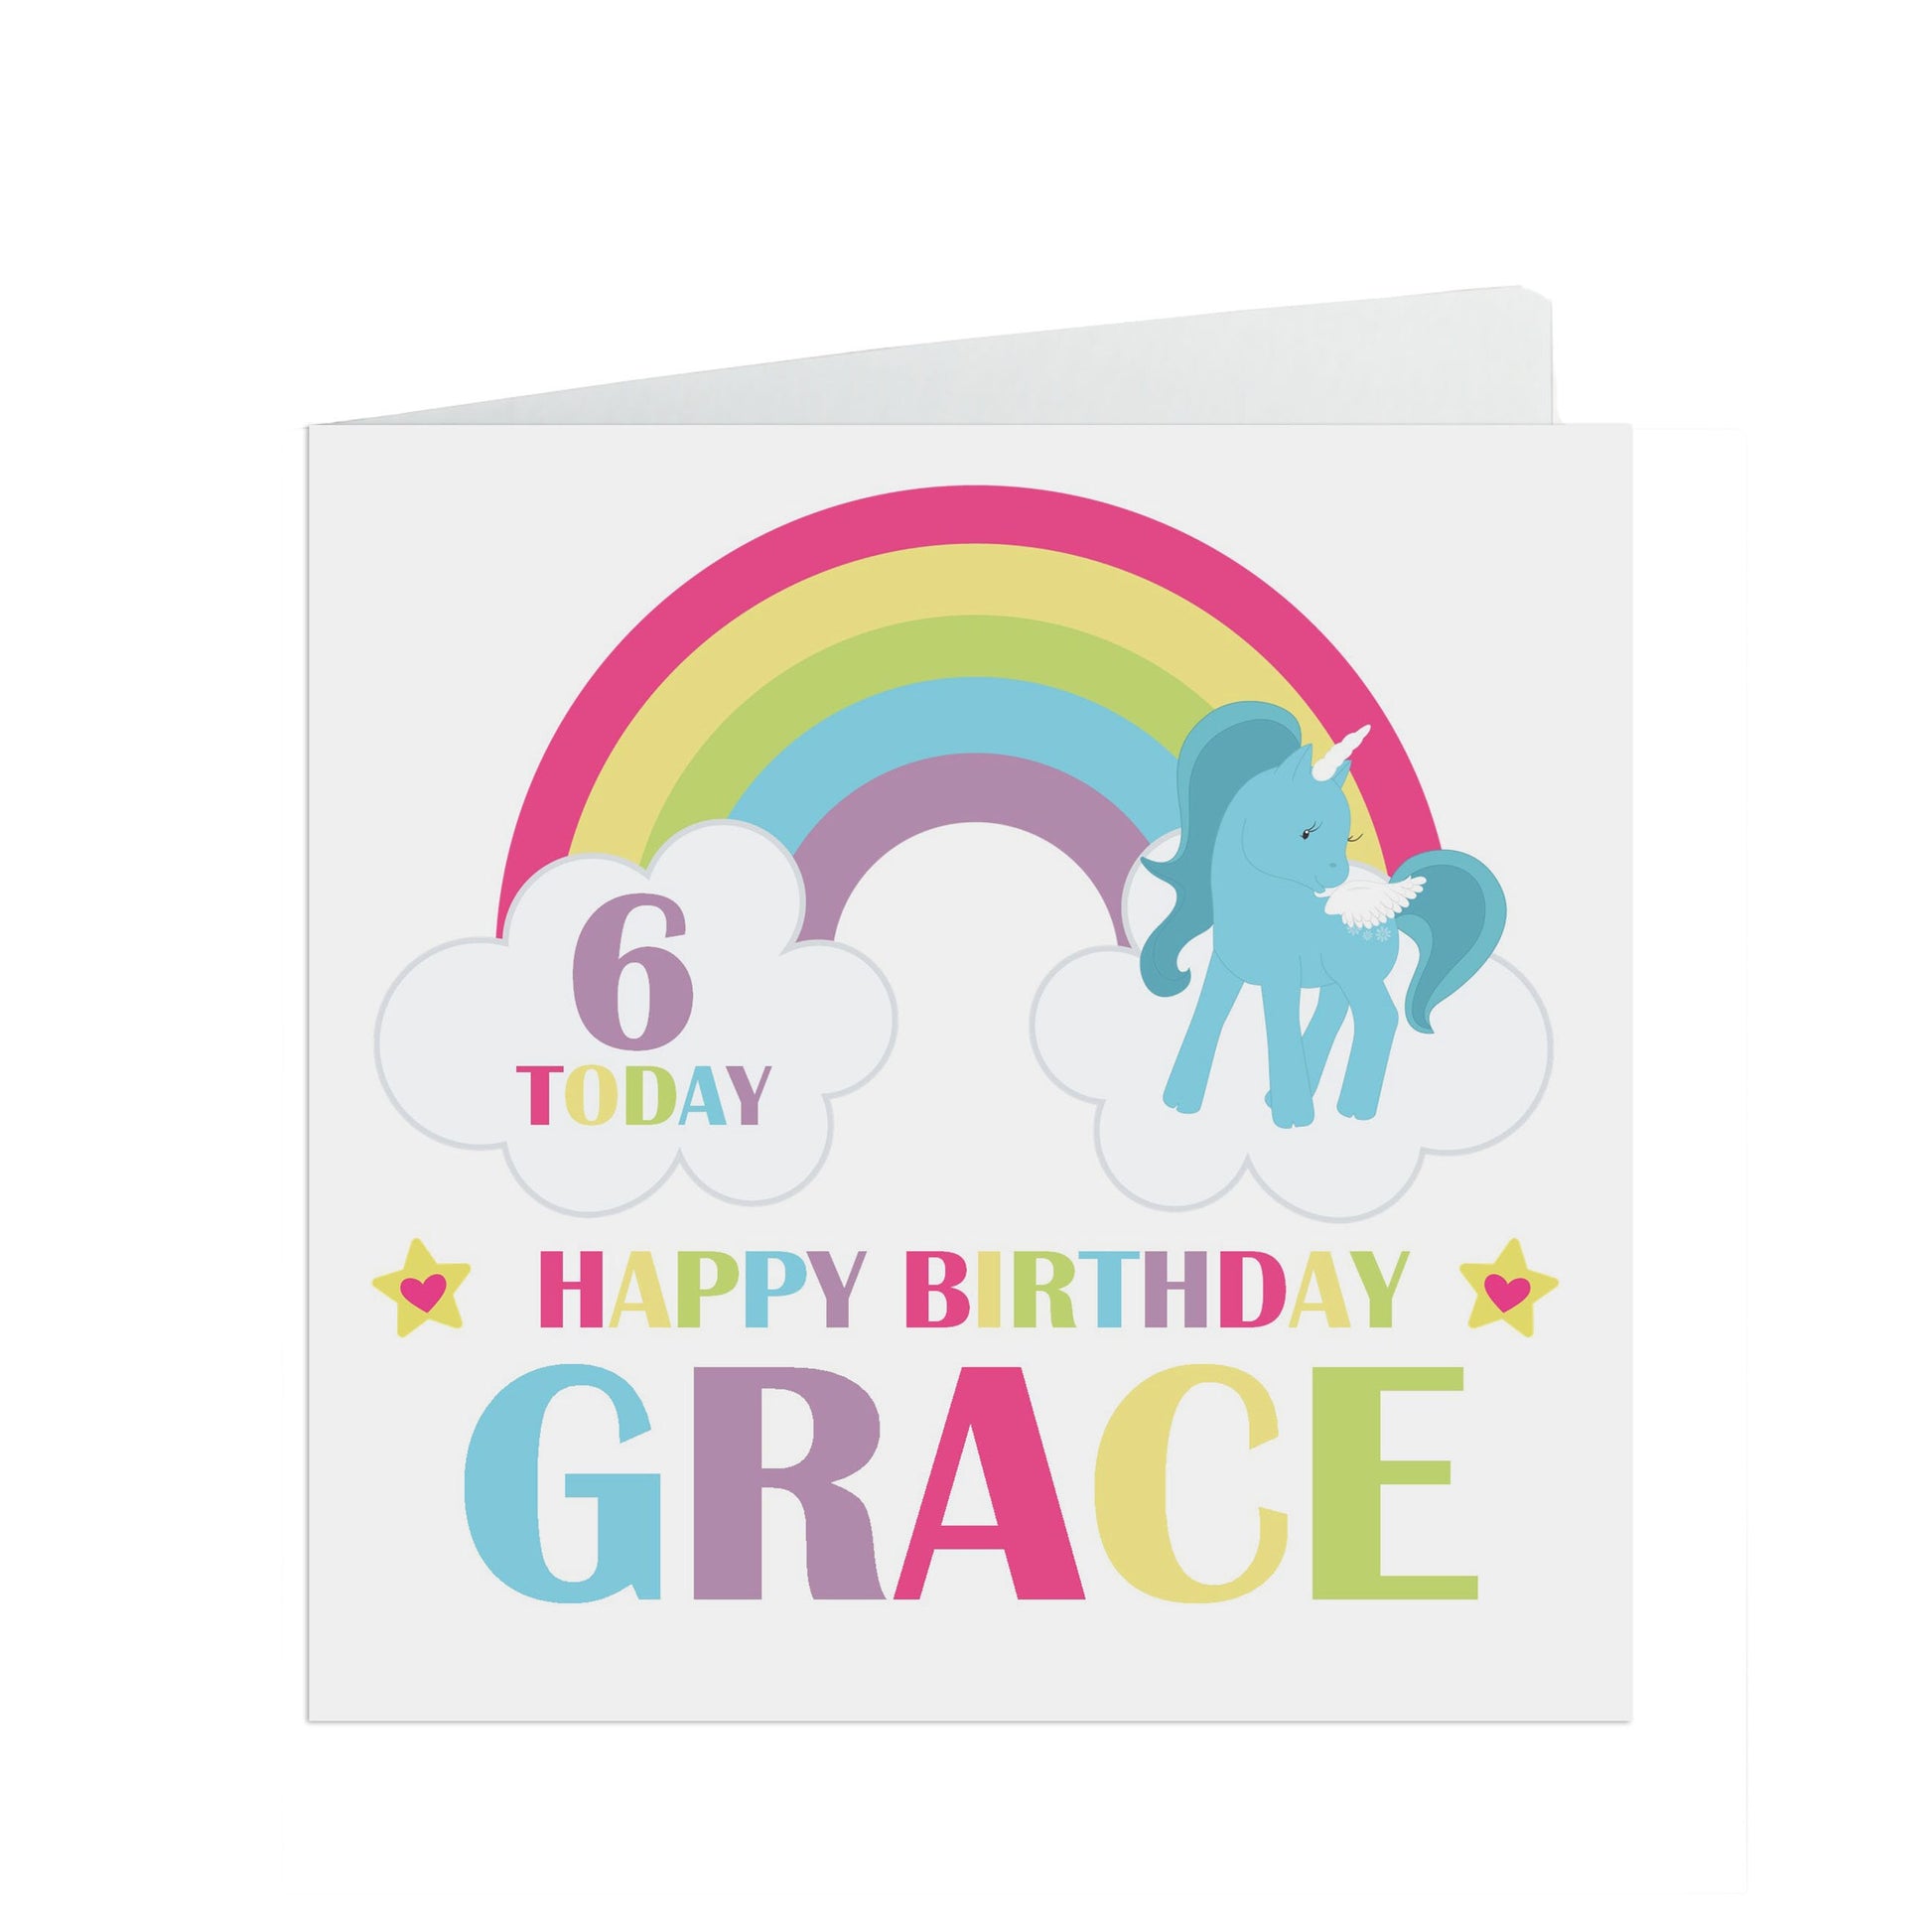 Personalised Unicorn Birthday Card With Name And Age For Daughter, Niece Or Granddaughter